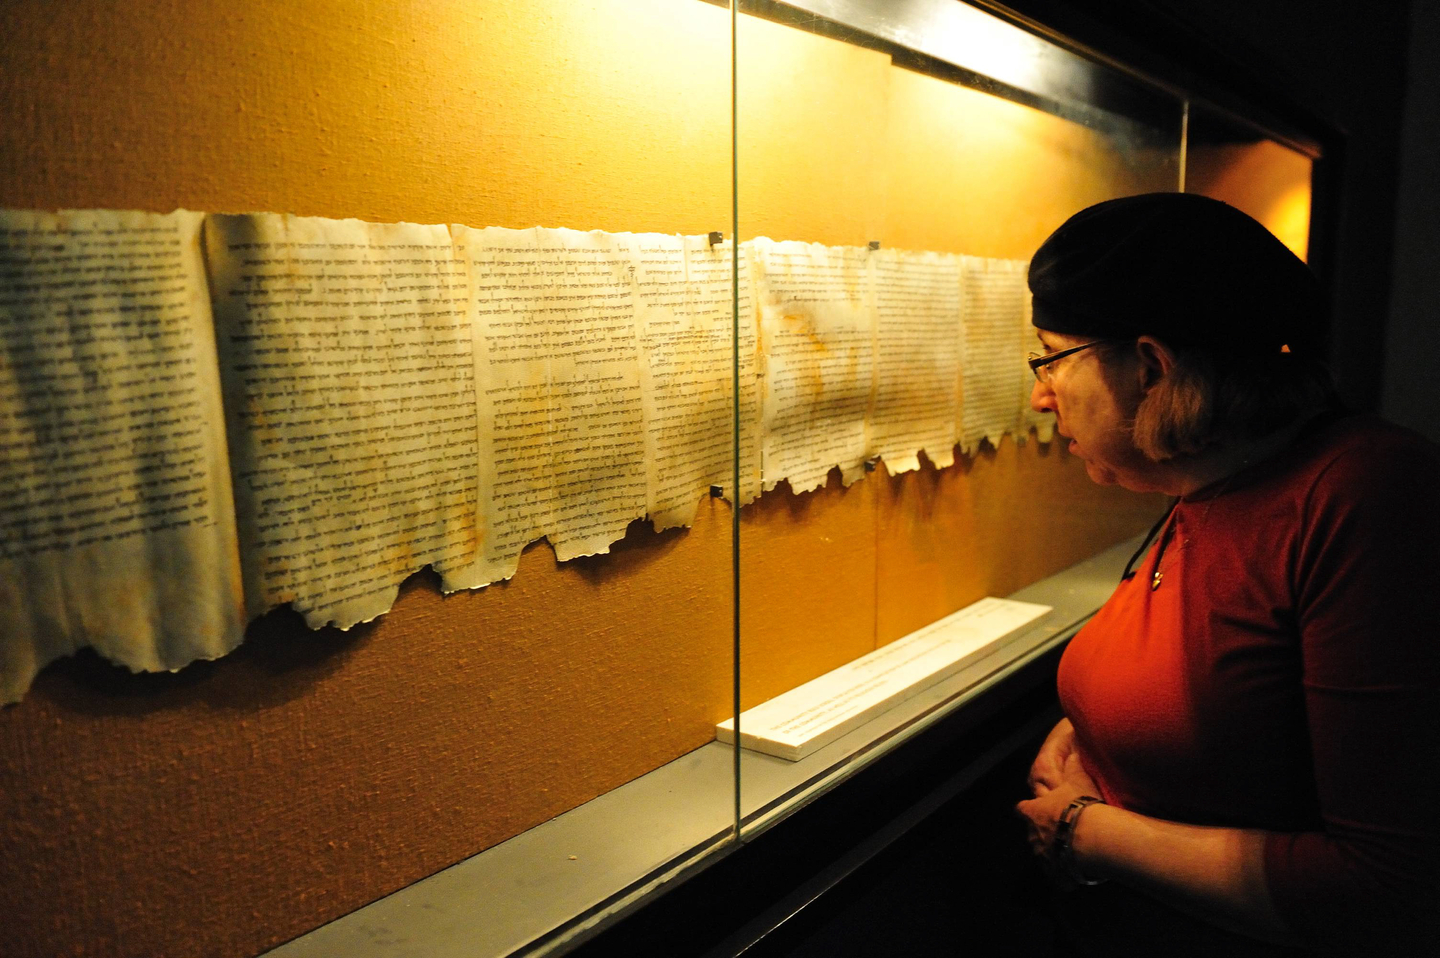 QUMRAN, ISRAEL – DEC 14 2008:Woman looks at the Dead Sea Scrolls on display at the caves of Qumran.The Dead Sea Scrolls were discovered in Qumran caves between the years 1947 and 1956.